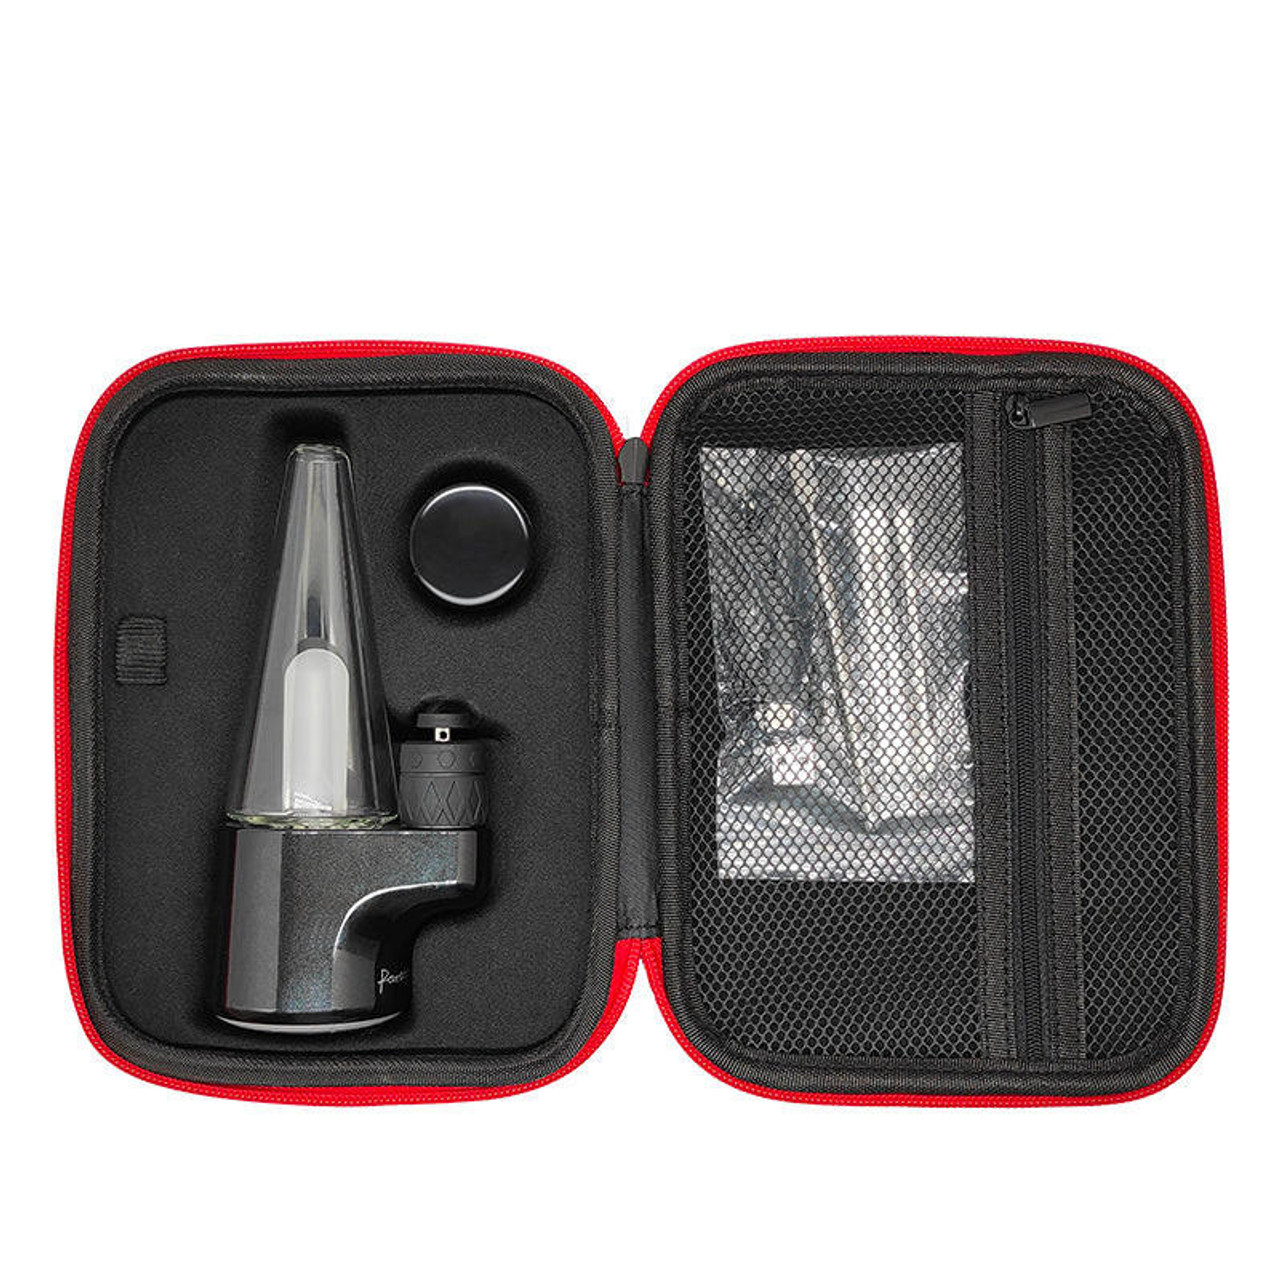 Buy Portable Vape Pens and Electronic Dab Rigs